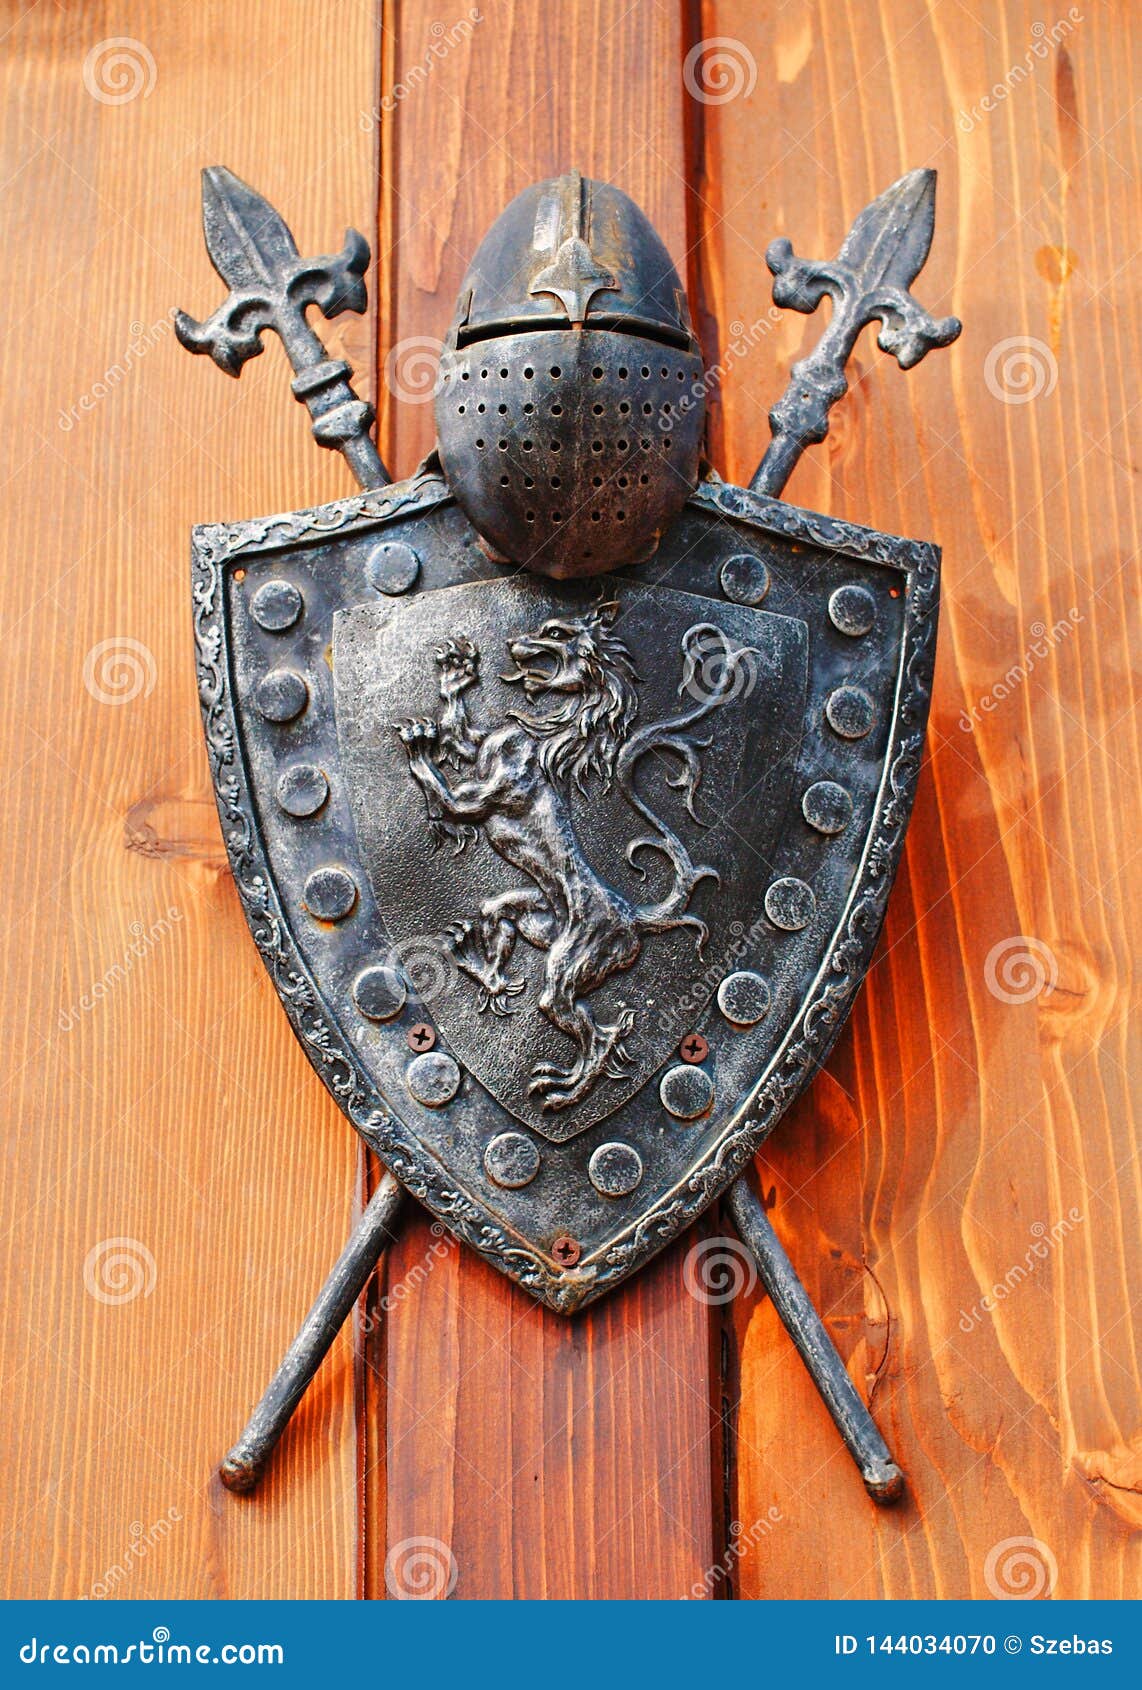 Medieval Knight Helmet and Shield Stock Photo - Image of spears, lion